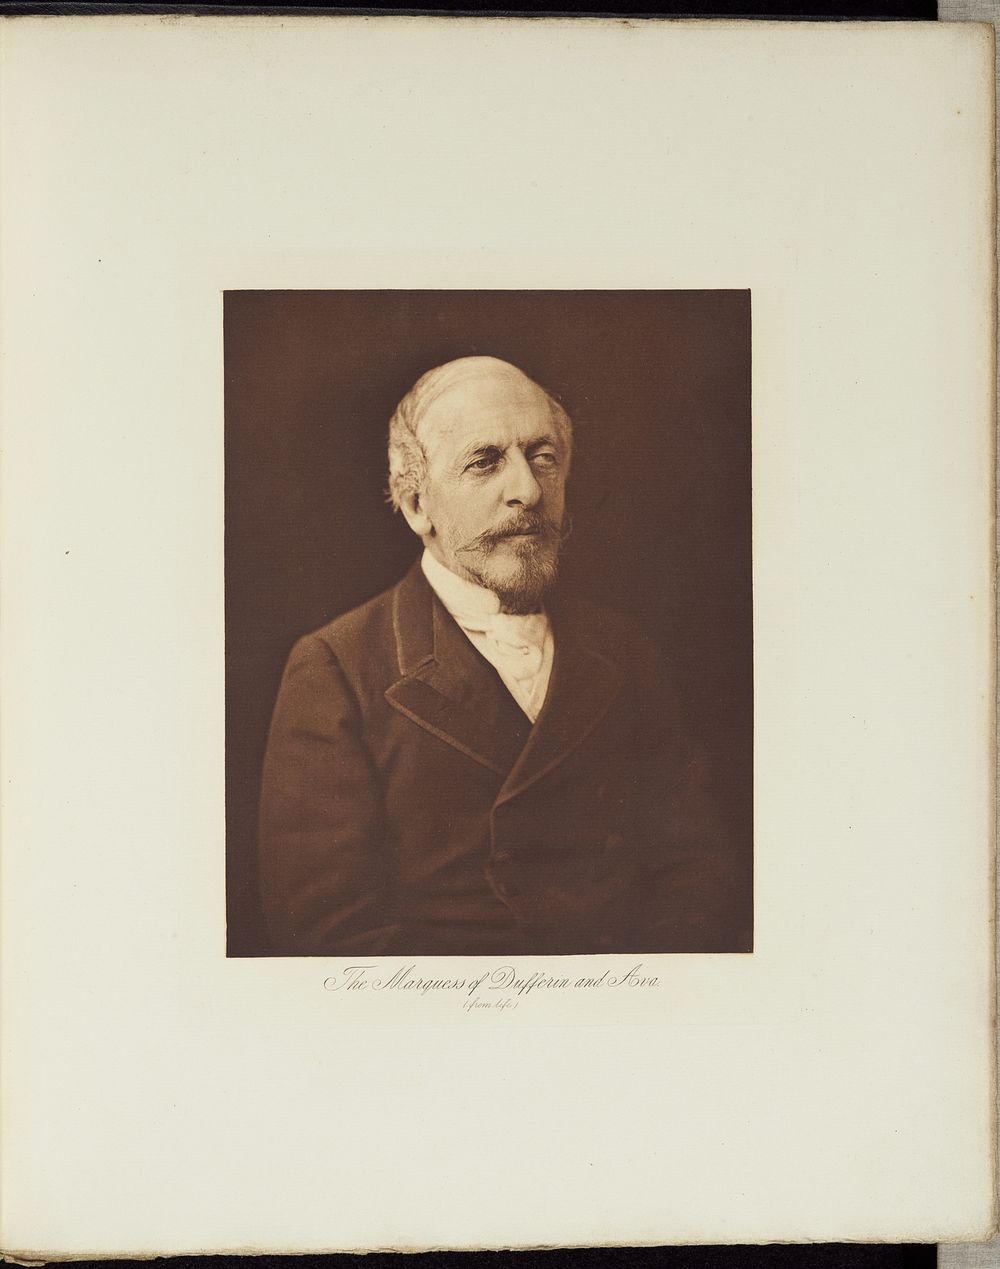 His Excellency the Marquess of Dufferin and Ava by Henry Herschel Hay Cameron